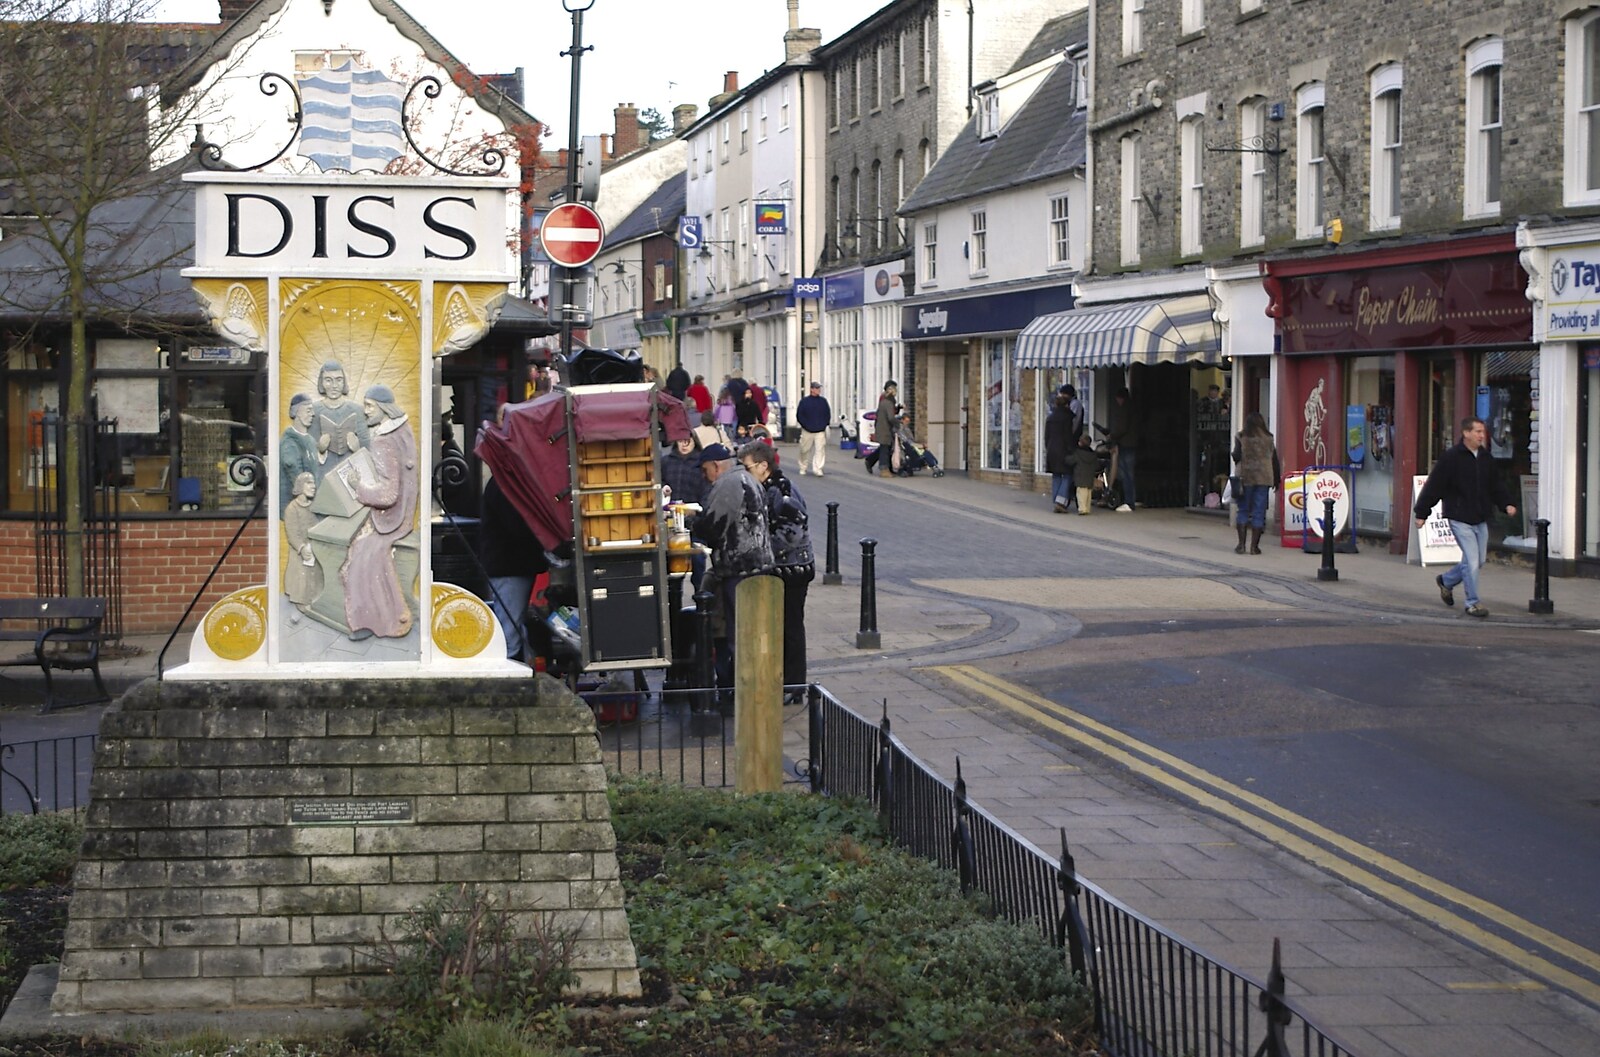 The Diss sign, and Mere Street from Random Scenes of Diss, Norfolk - 20th November 2004